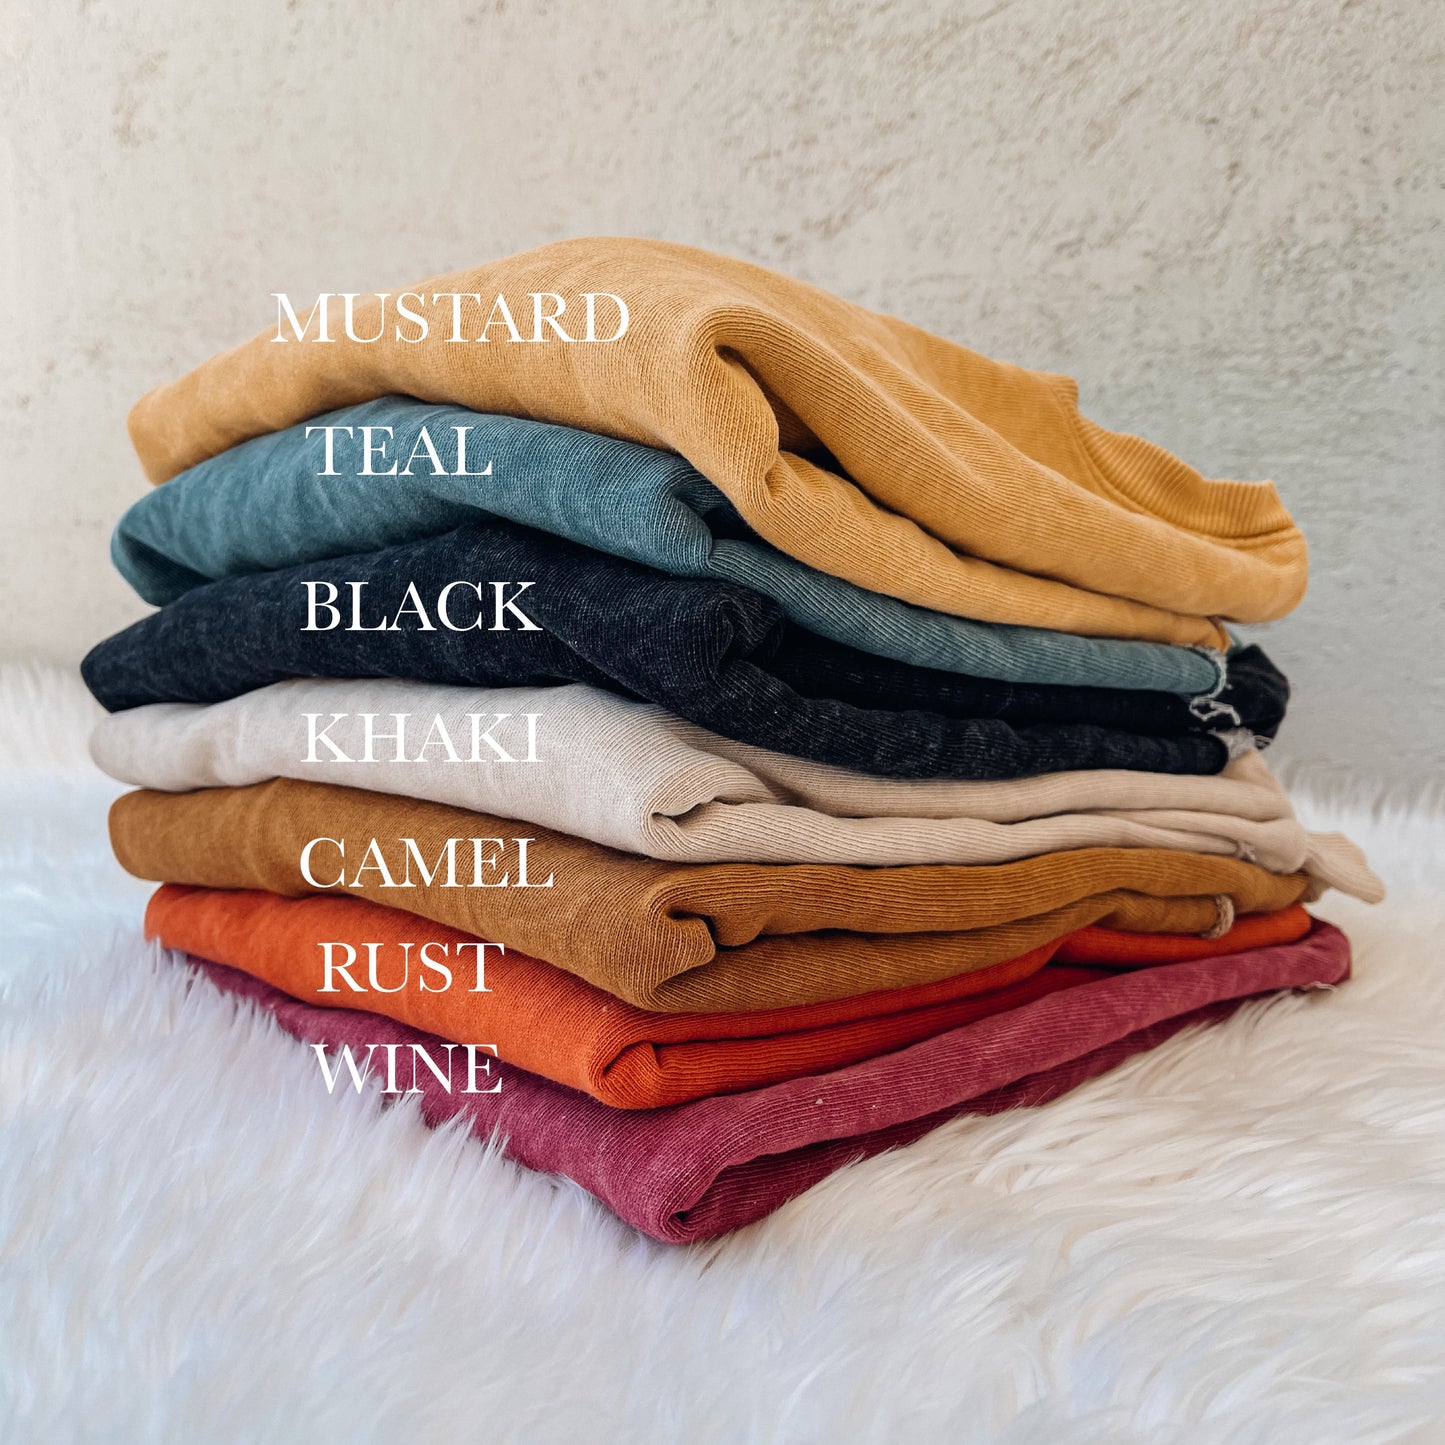 Painted in All the Shades of Fall Sweatshirt